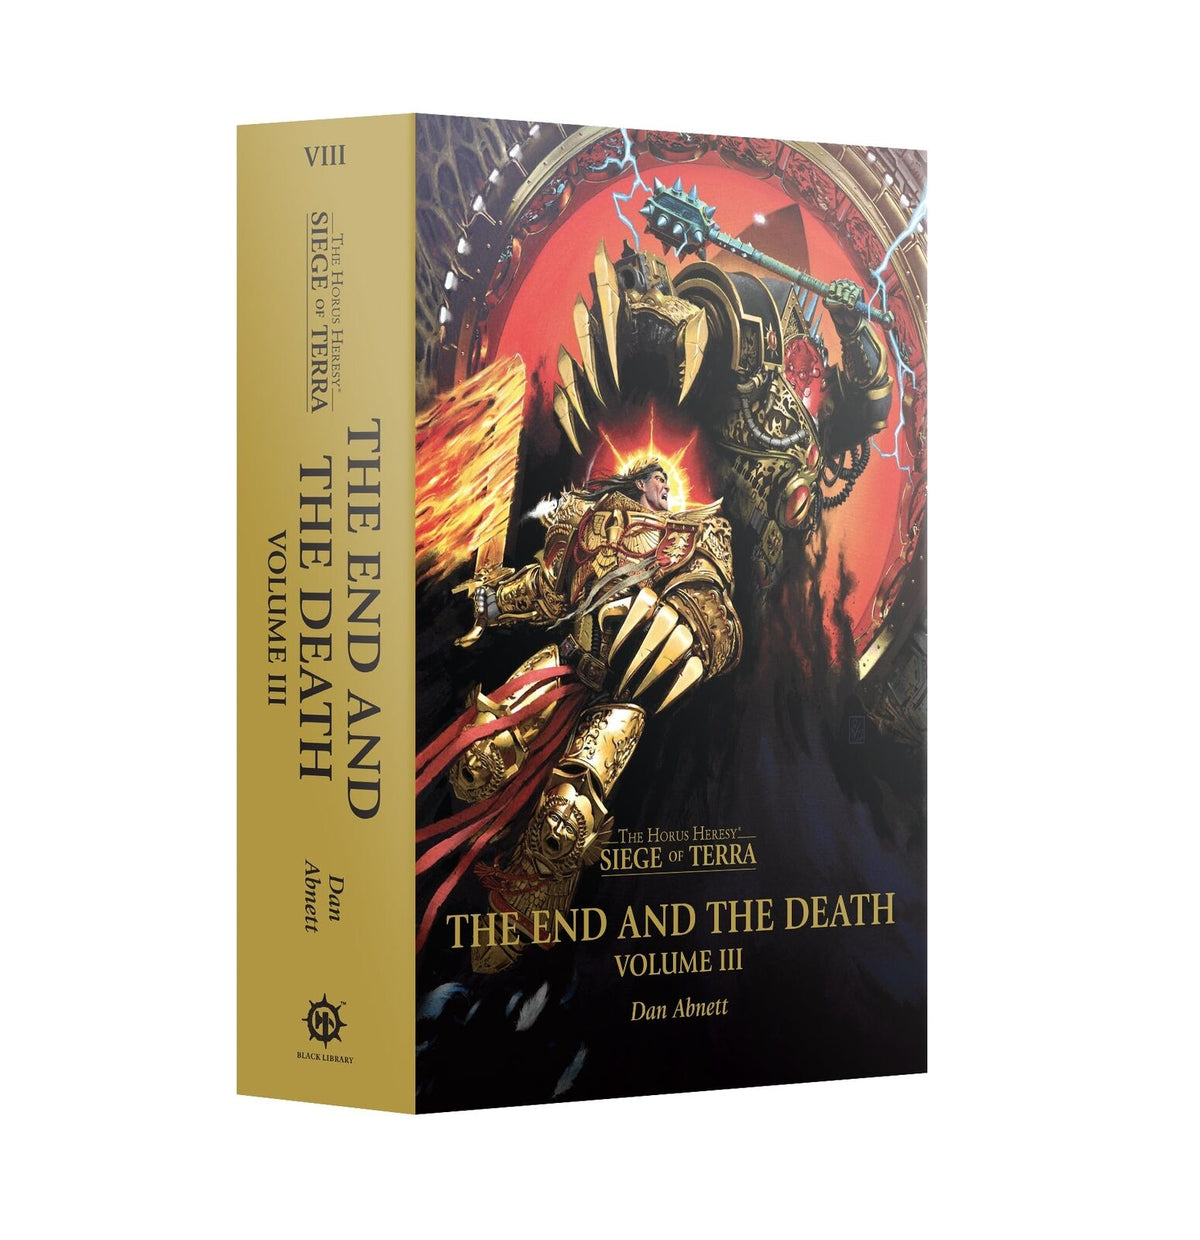 Warhammer 40K: THE END AND THE DEATH: VOLUME 3 HB